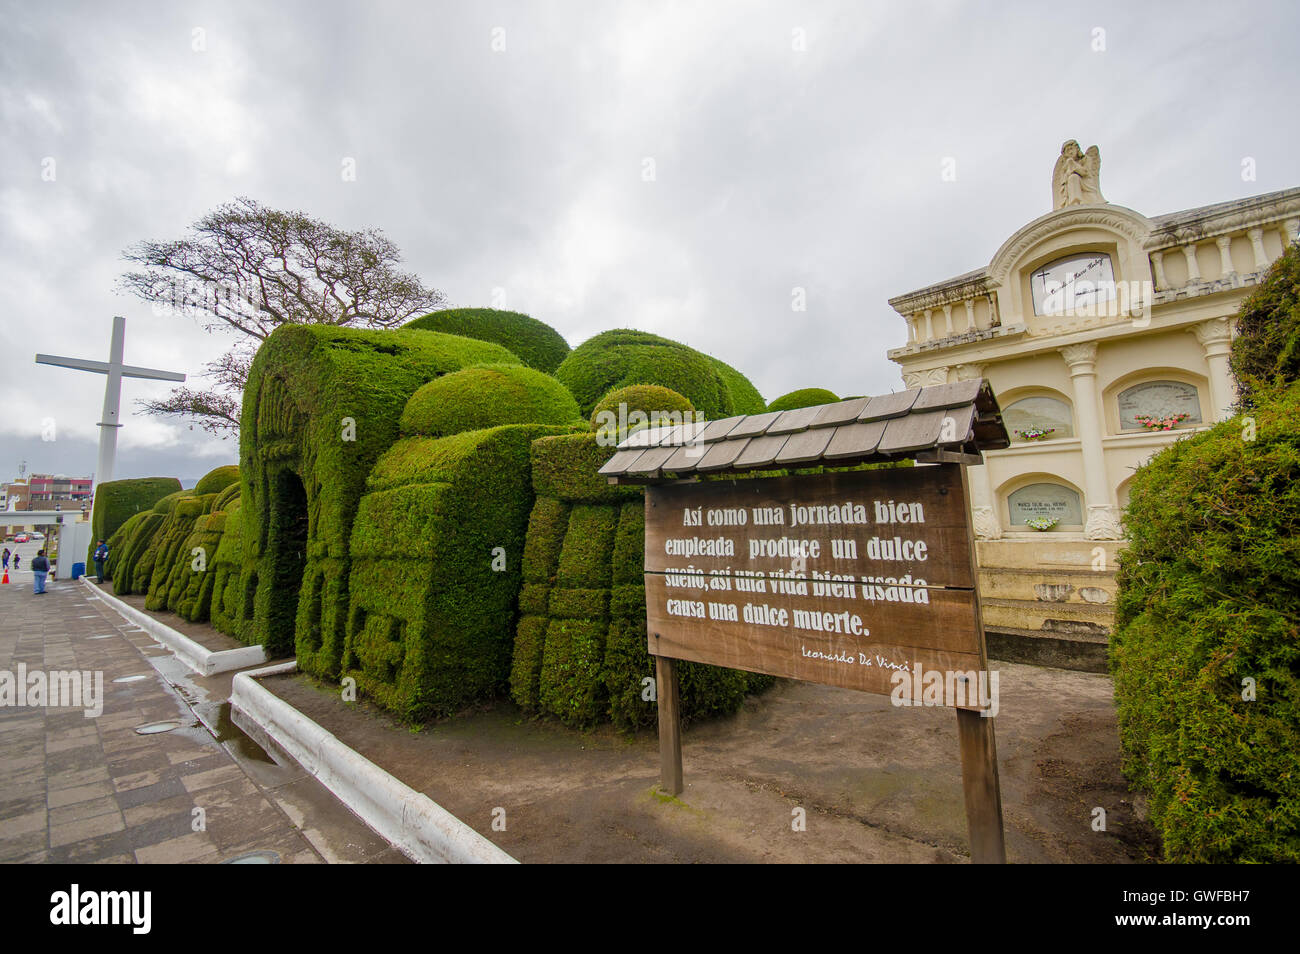 TULCAN, ECUADOR - JULY 3, 2016: some plants sculptures at the entrance of the cemetery next to a wood sign with a phrase on it Stock Photo